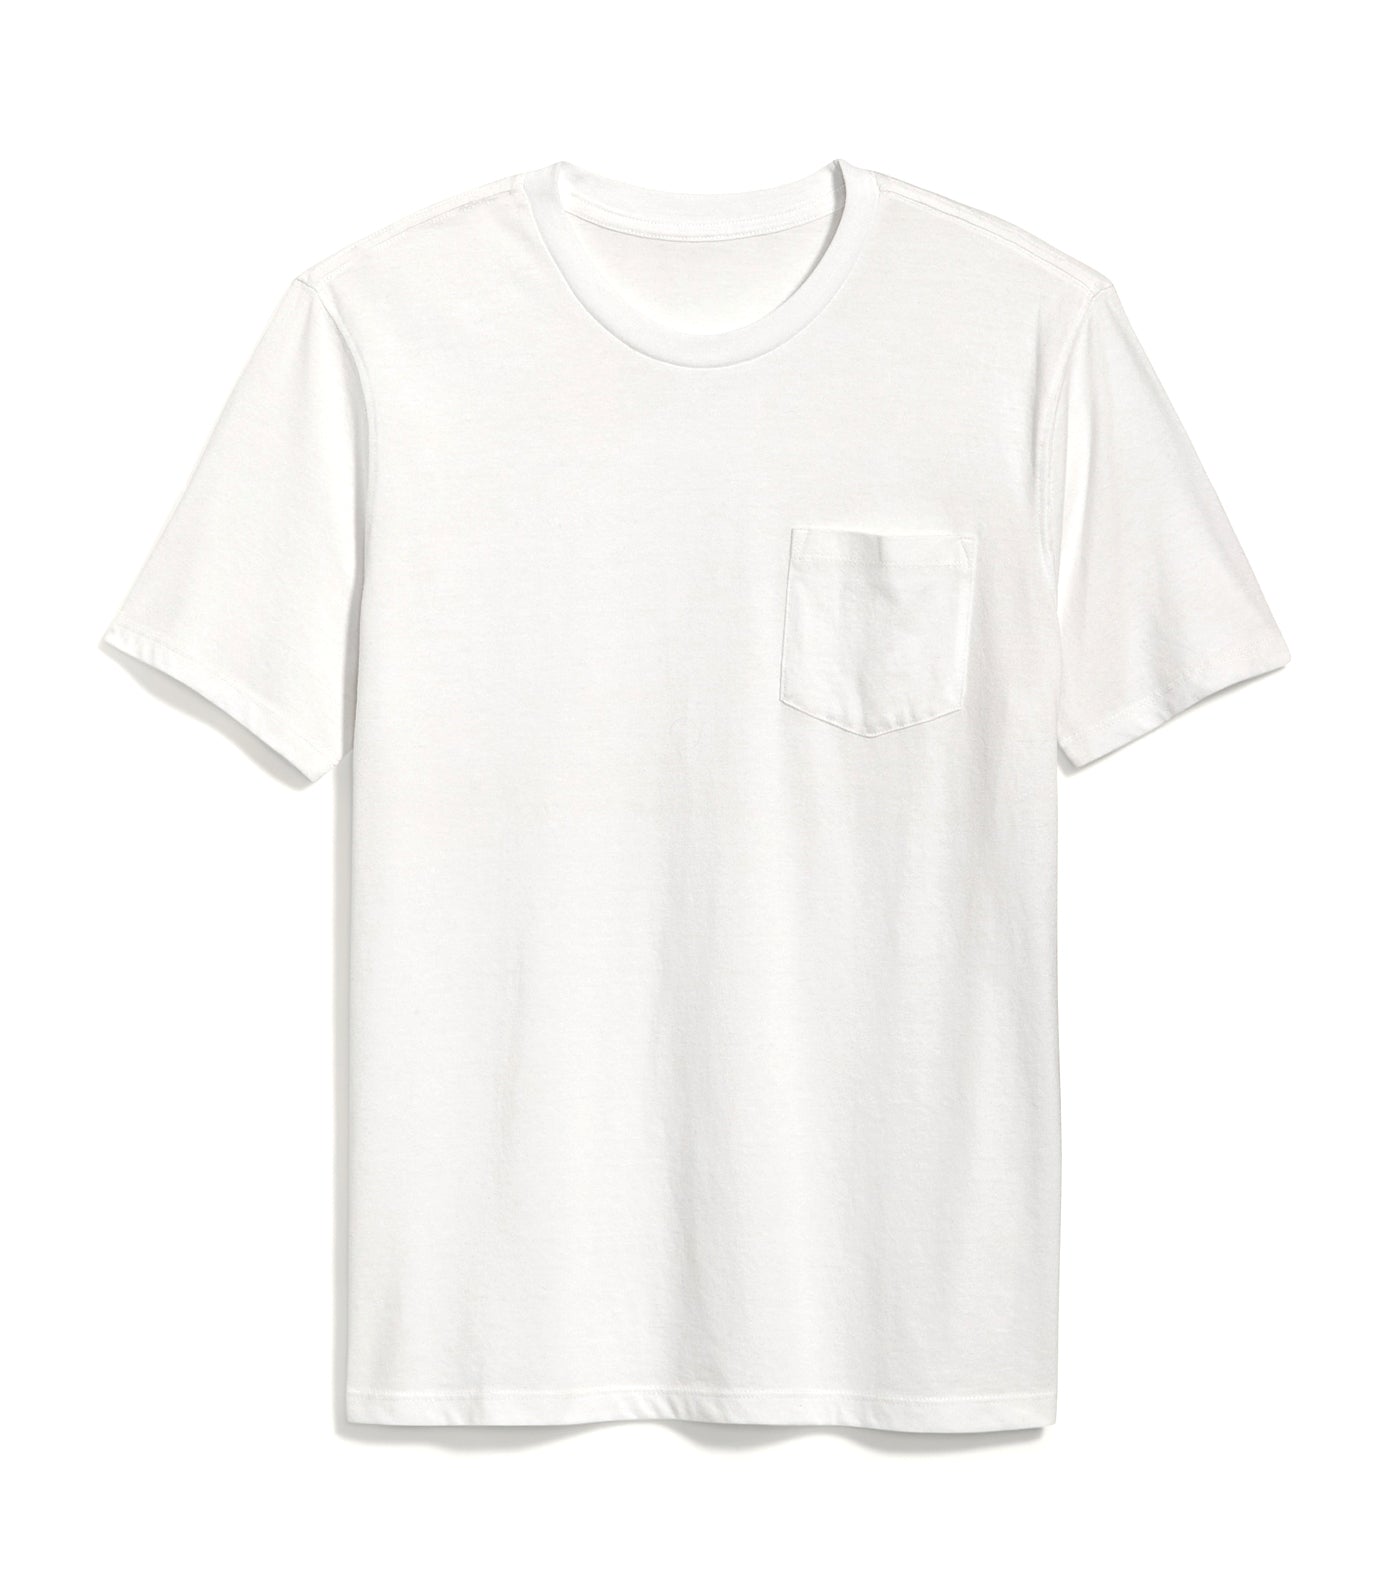 Soft-Washed Chest-Pocket Crew-Neck T-Shirt for Men White Lilies